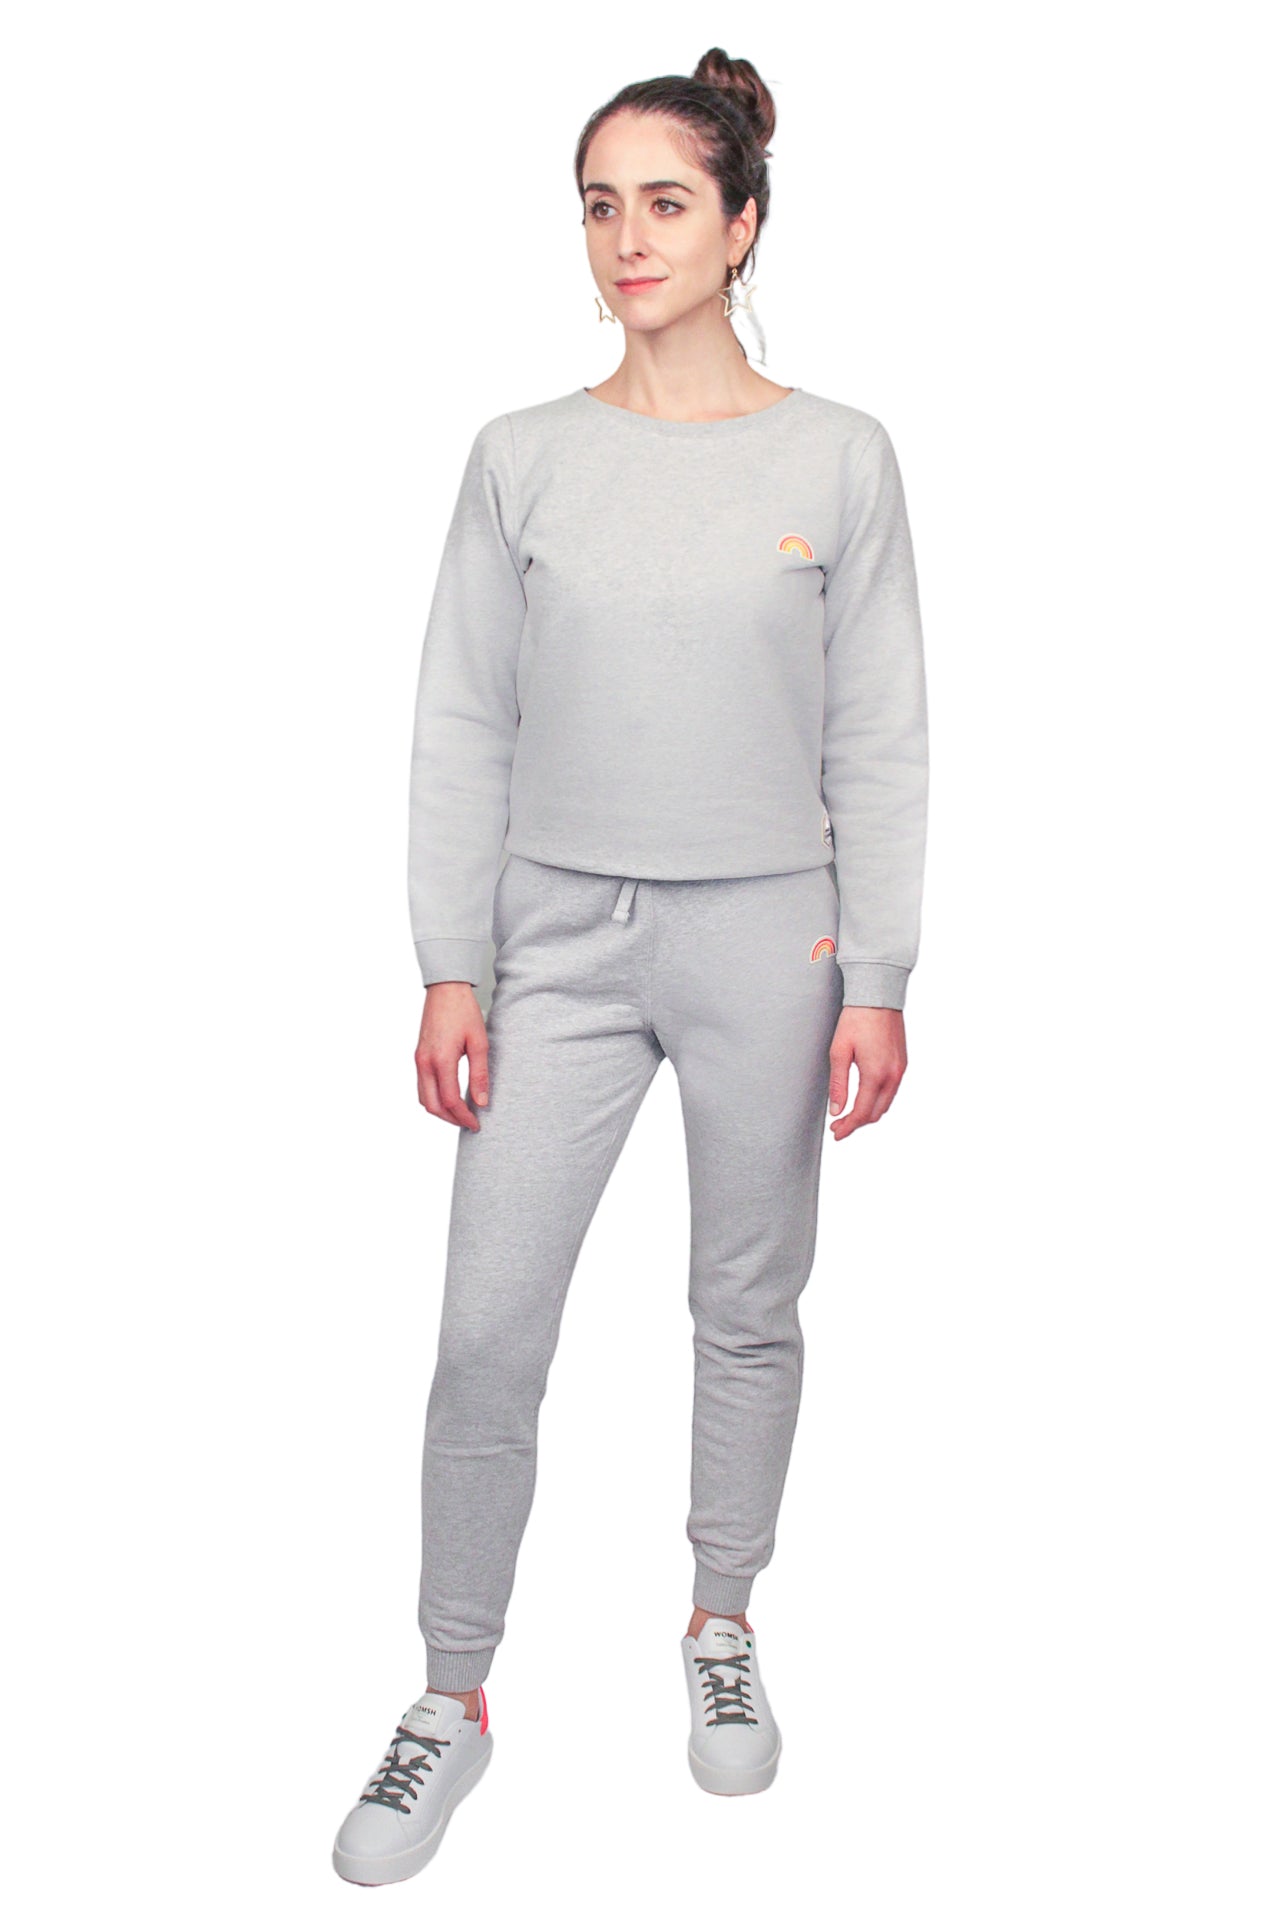 French Disorder Rainbow Melrose Jogger Sweatpants (Final Sale)